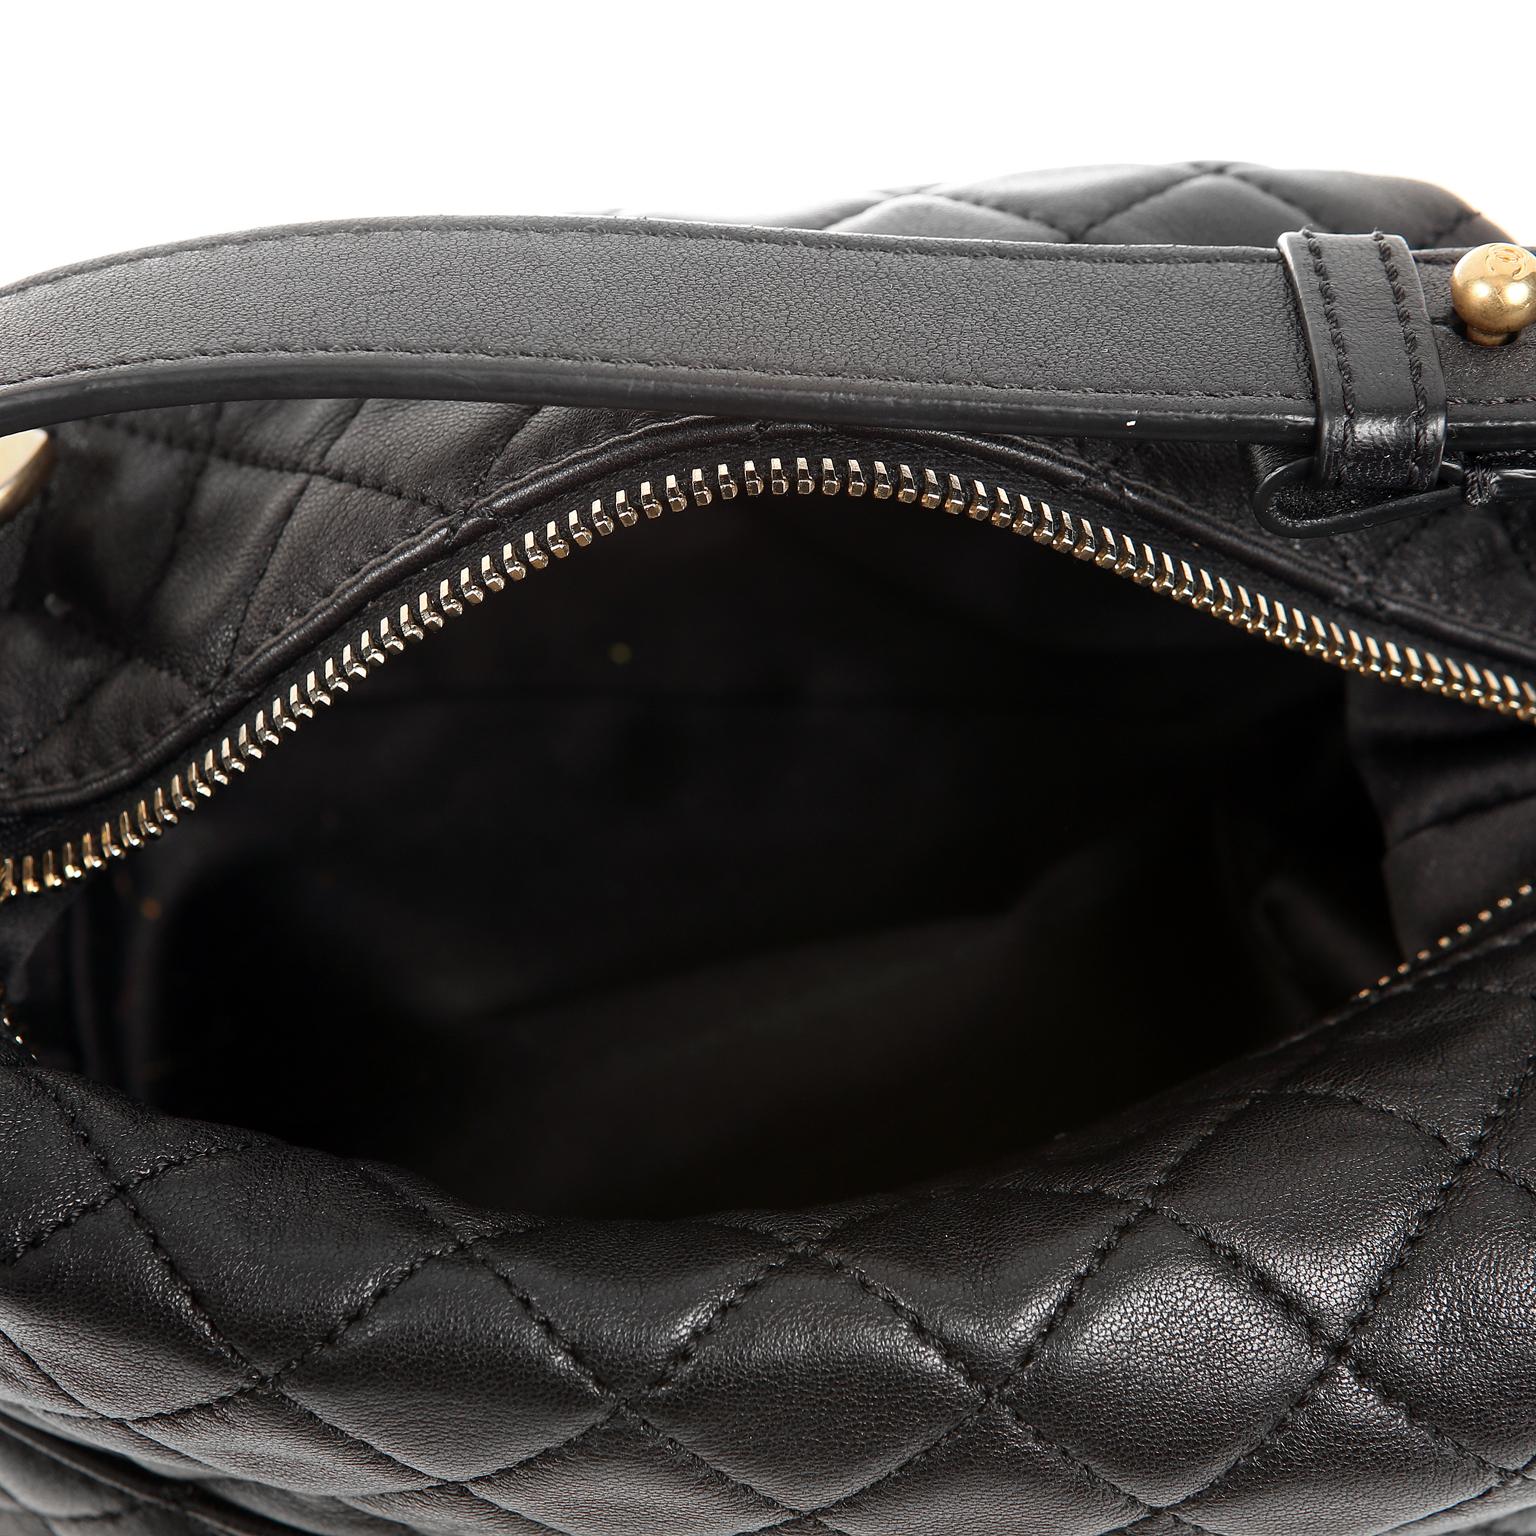 Chanel Black Quilted Leather Crossbody Bag 2